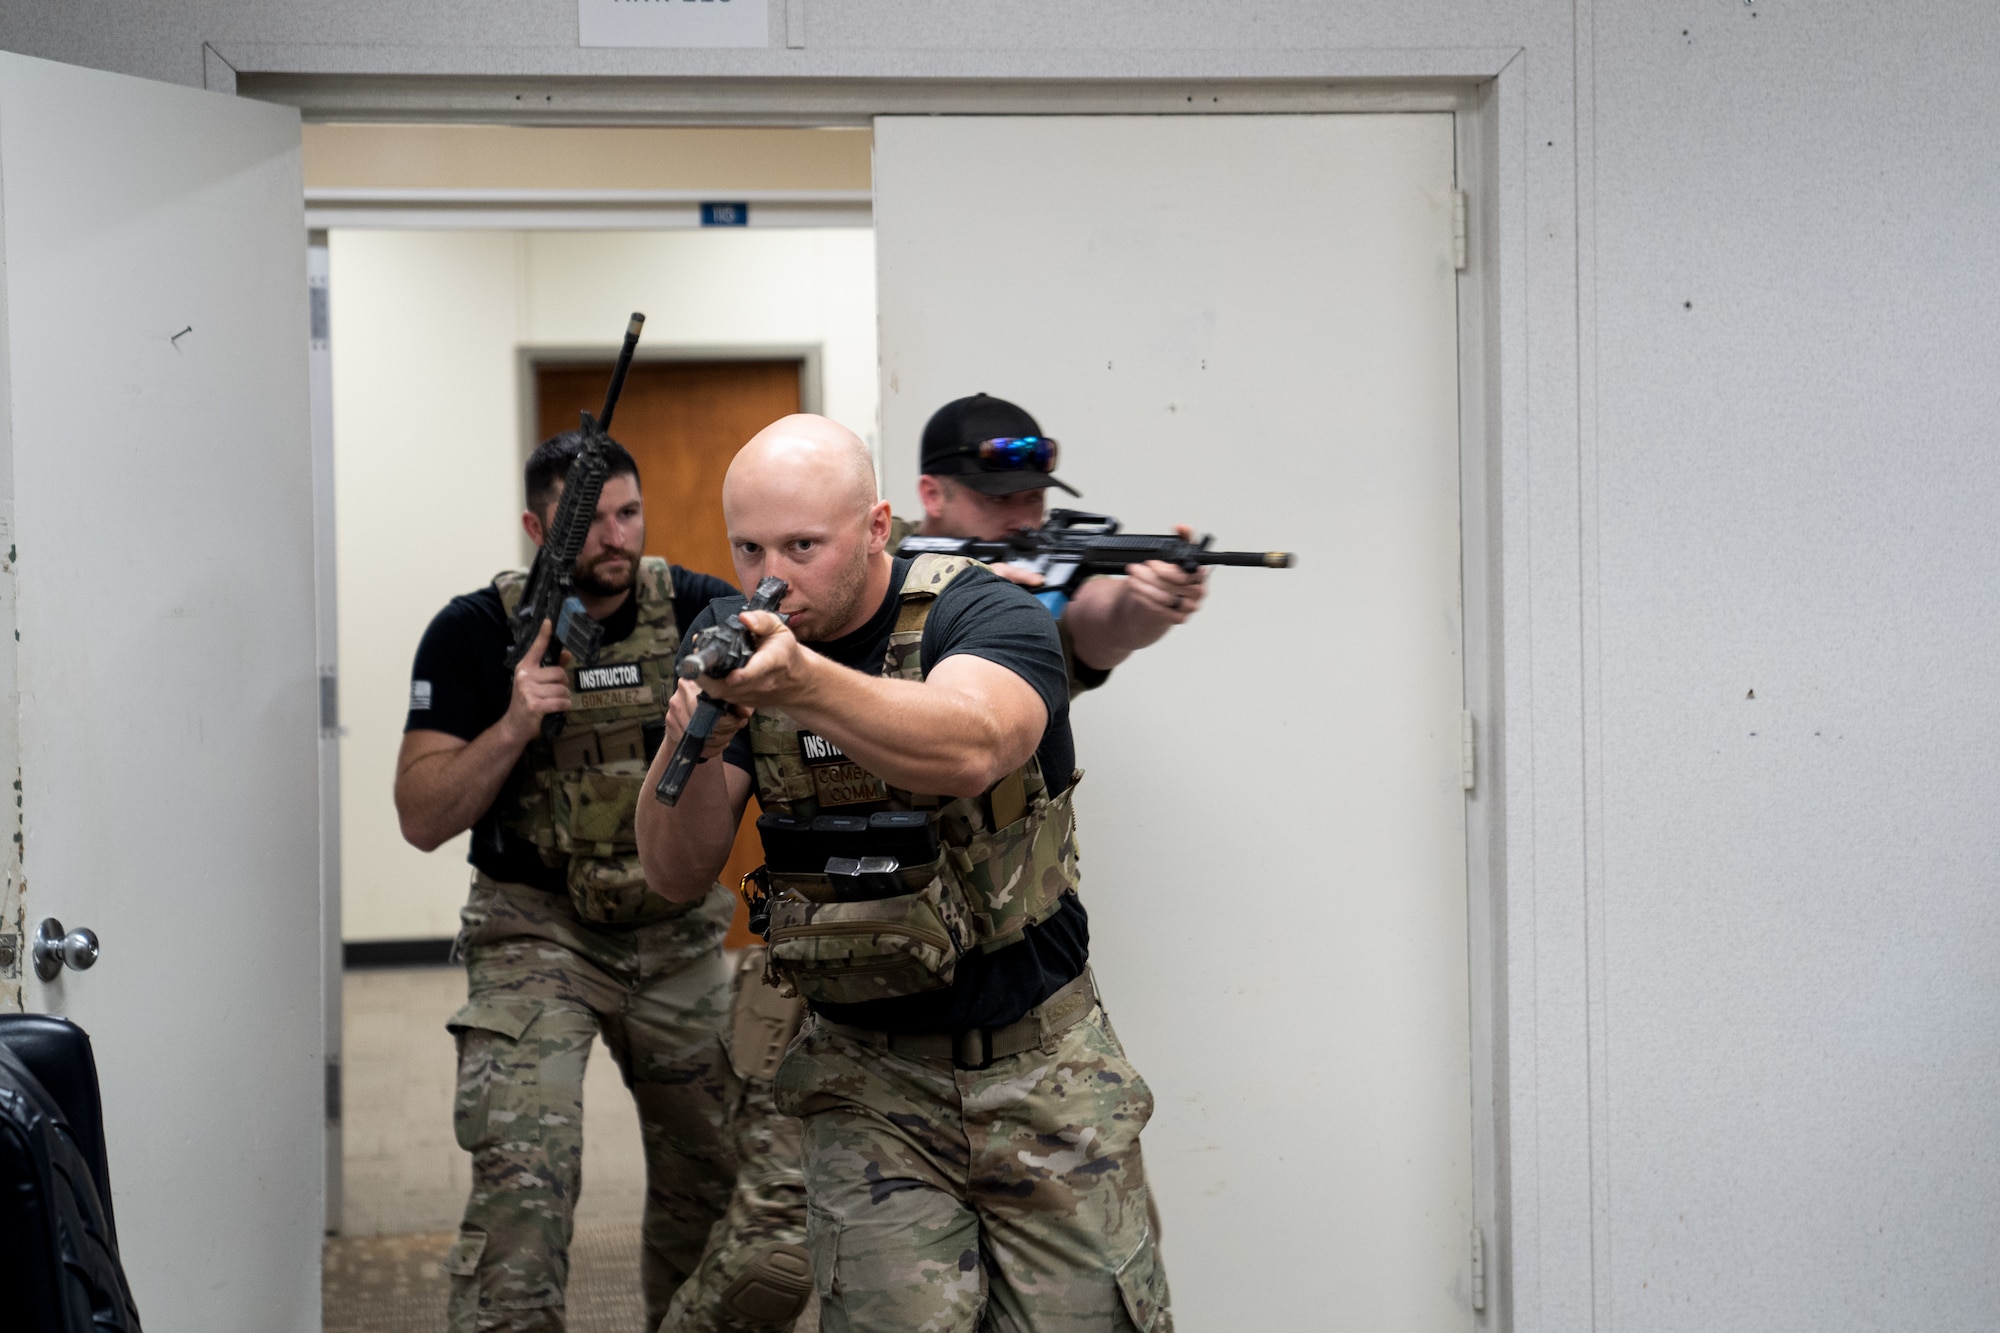 Instructors from the 5th Combat Communications Support Squadron Combat Readiness demonstrate how to clear a room for members of the 85th Engineering Installation Squadron using close quarter battle tactics during a MOB school course at Keesler Air Force Base, Mississippi, April 12, 2023.